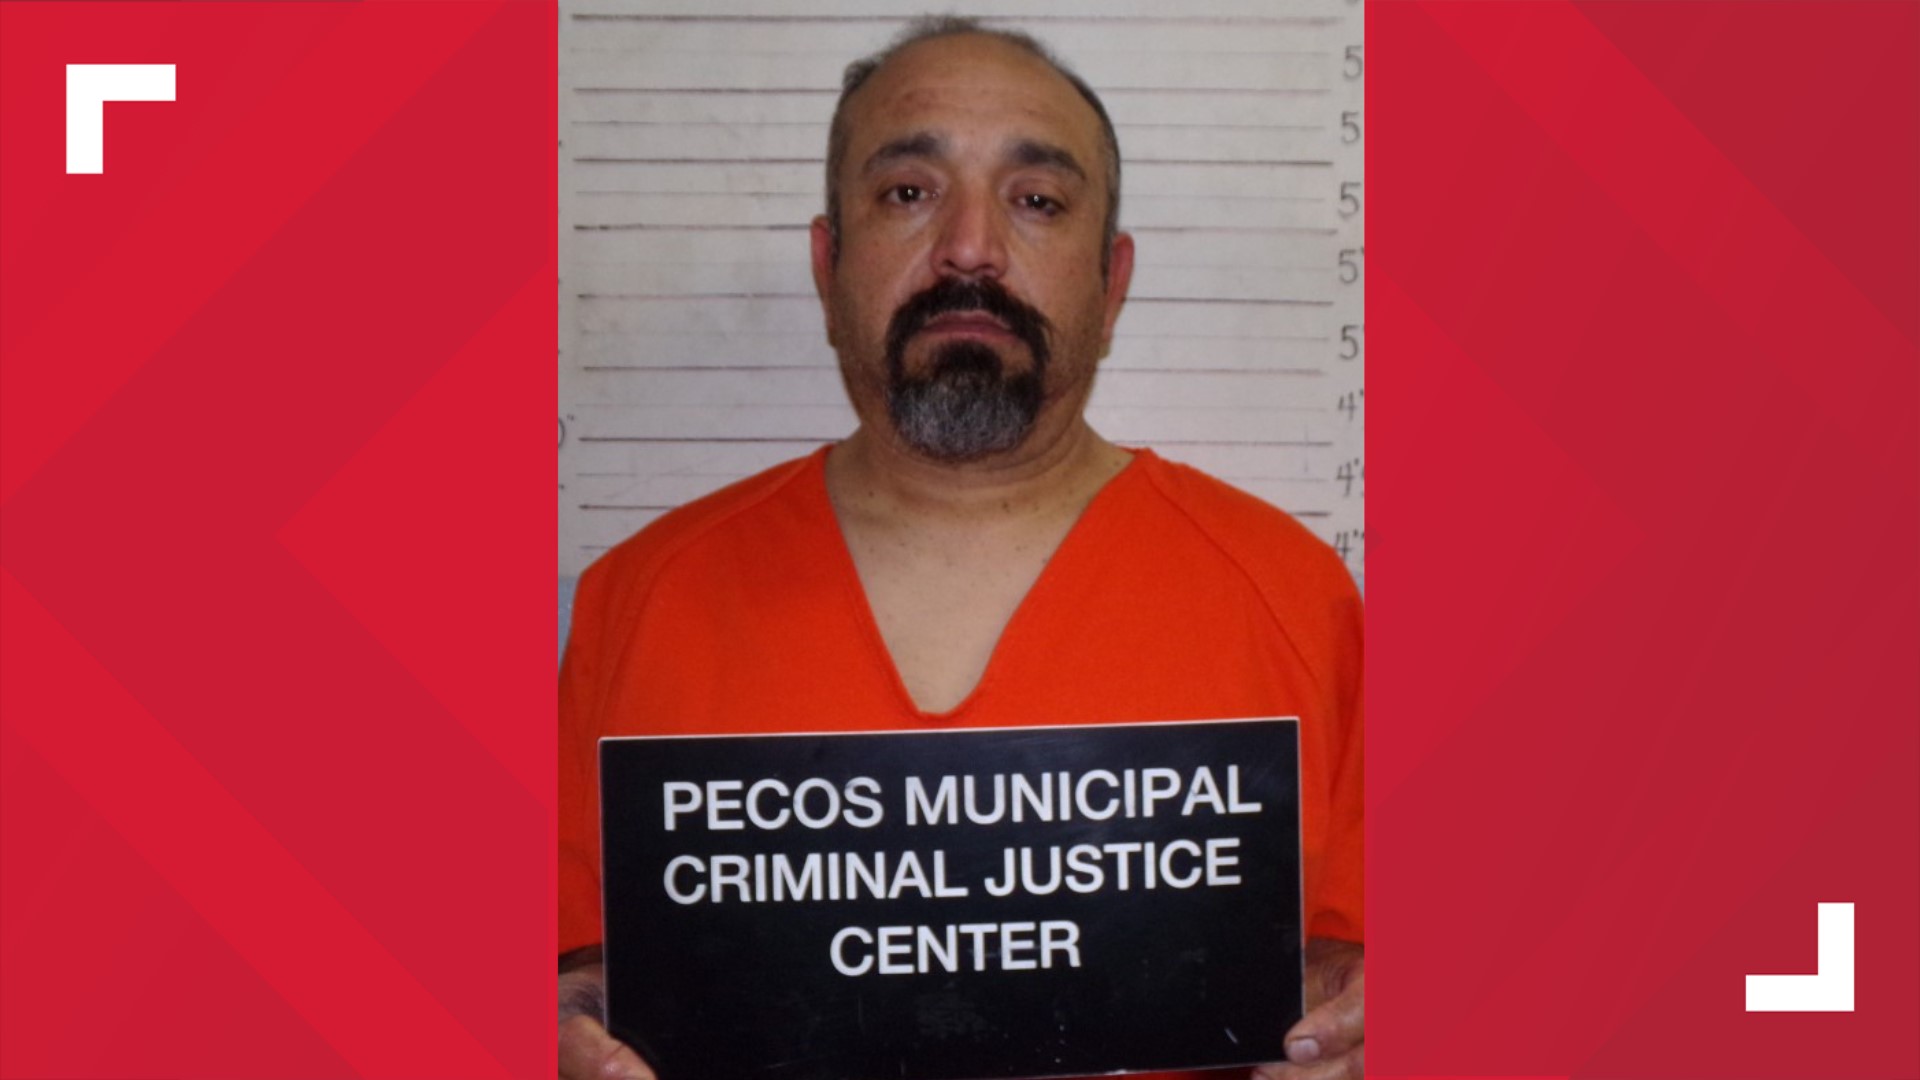 44-year-old Jason Lee Martinez has been charged with Murder and Aggravated Assault.